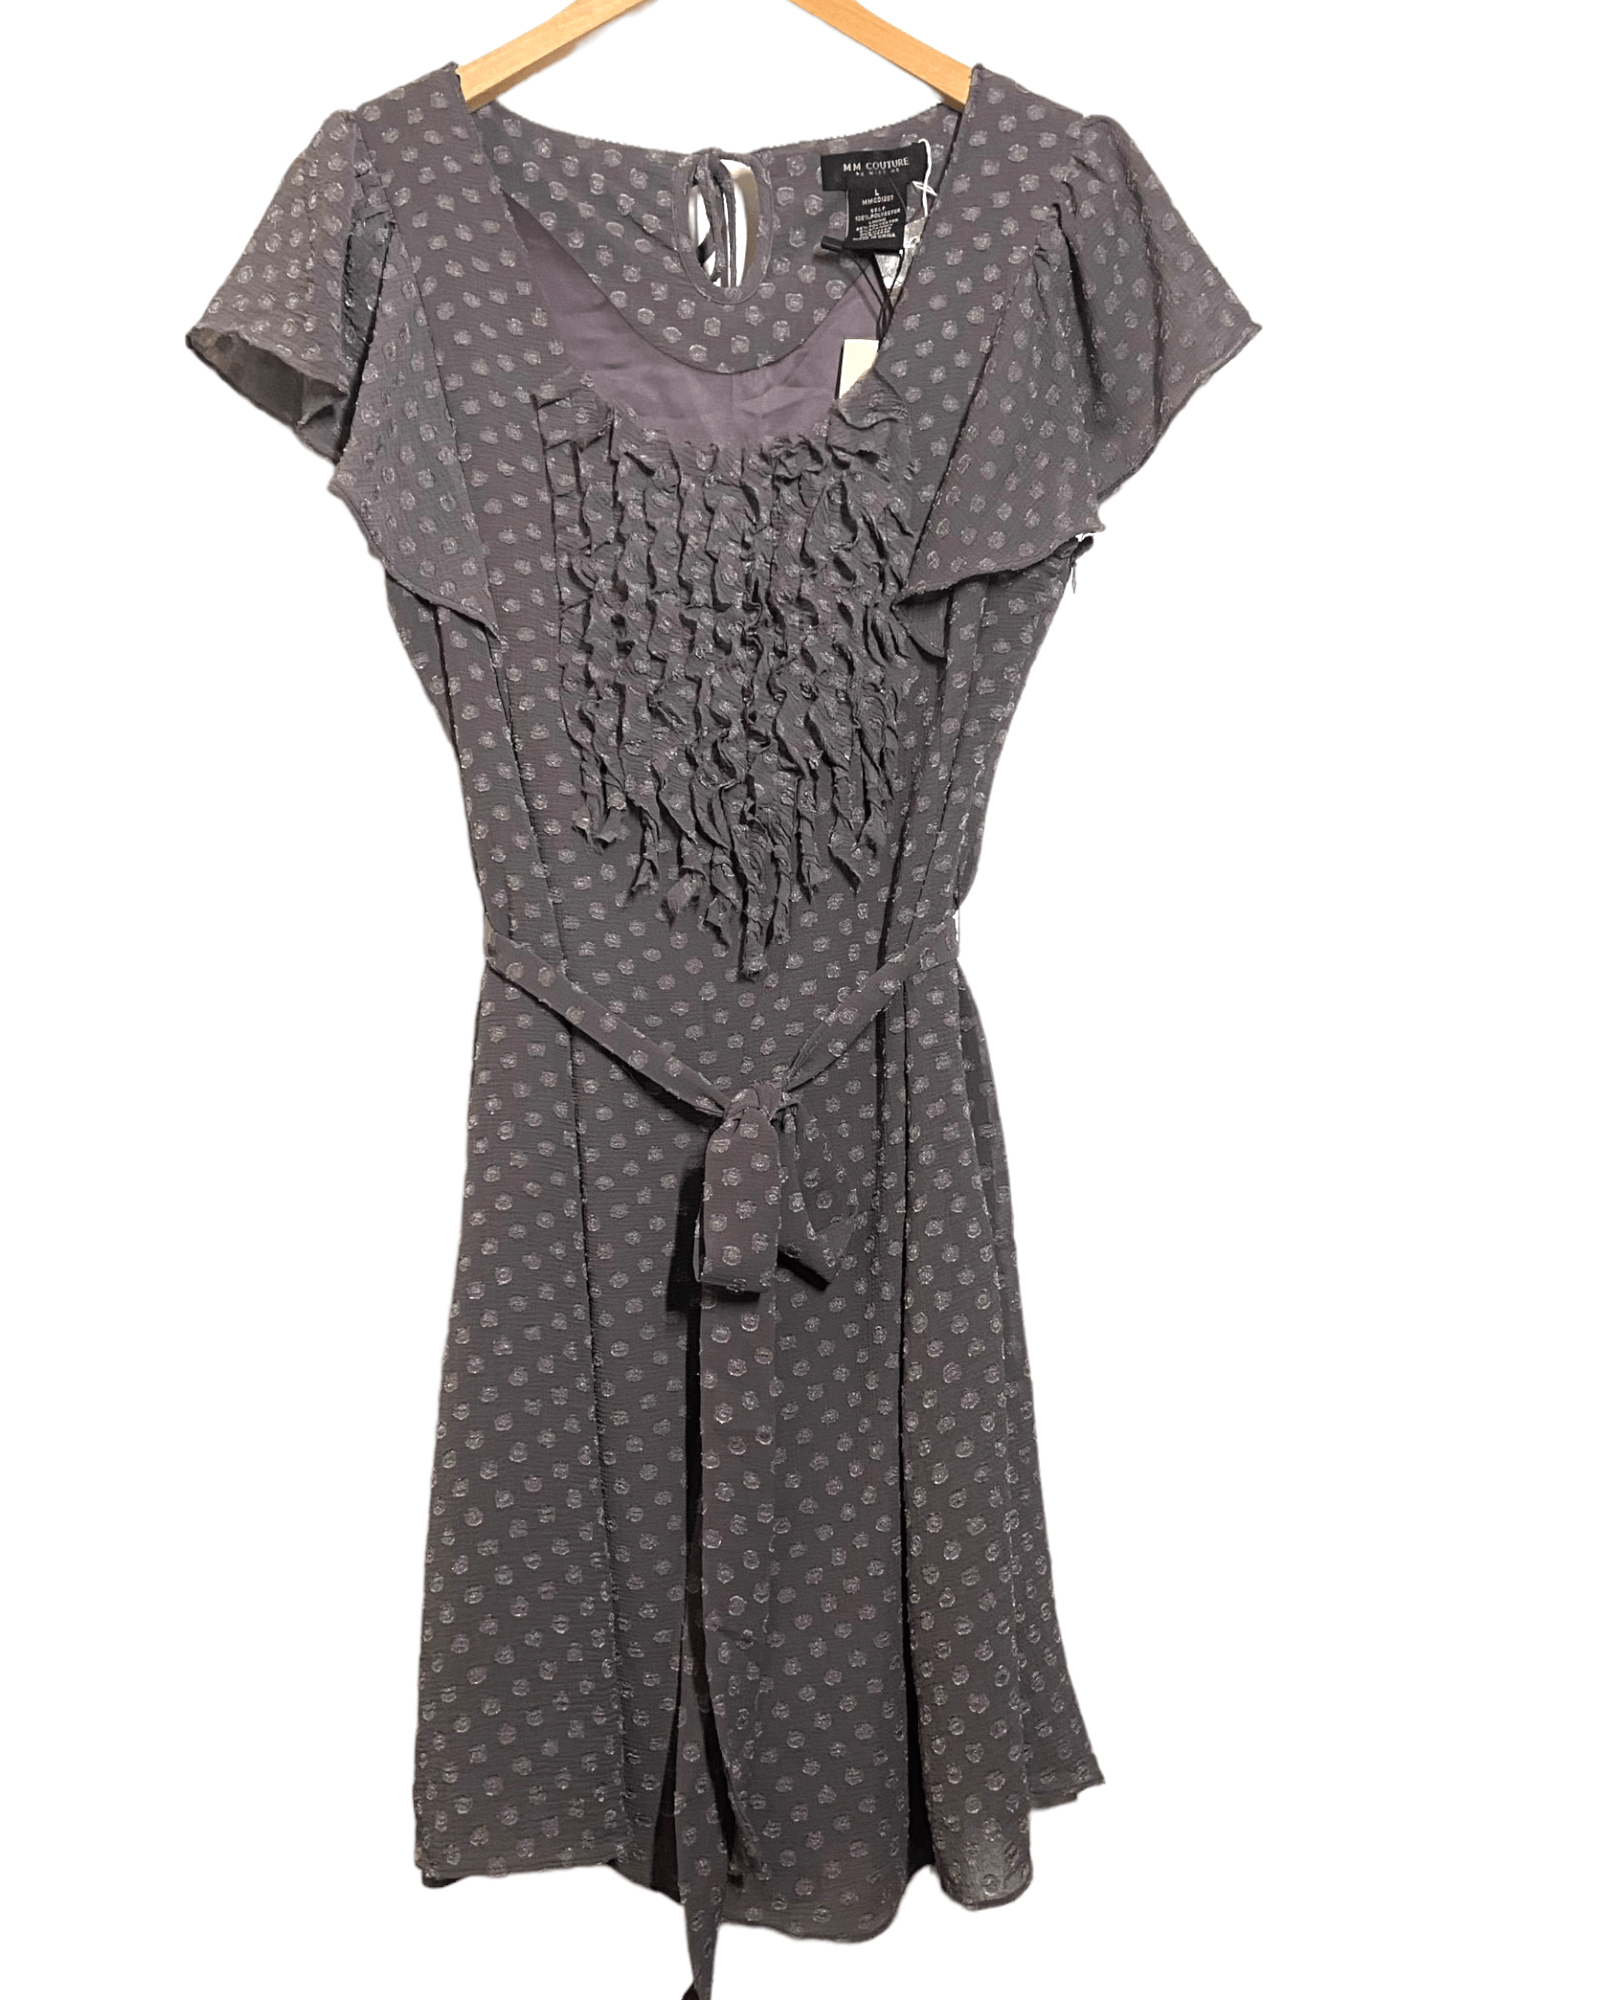 Light Summer MM by MISS ME COUTURE slate gray dot ruffle dress